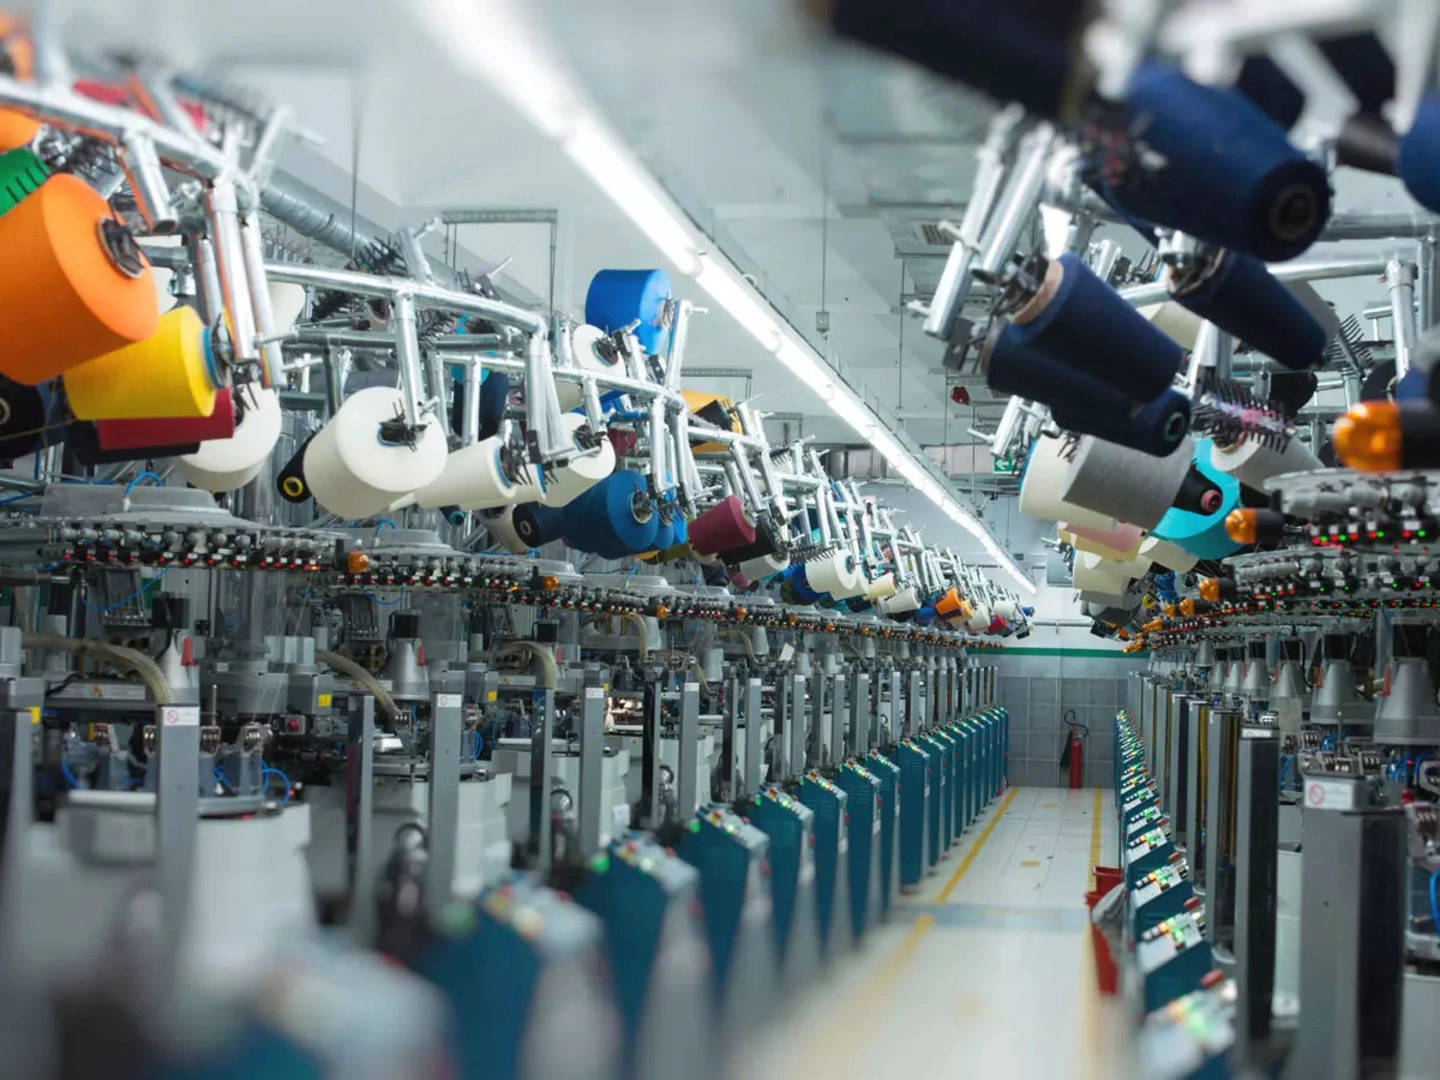 Textile businesses see the impact of inflation pressures, uncompetitive prices in the second quarter of fiscal year 2023: ICRA